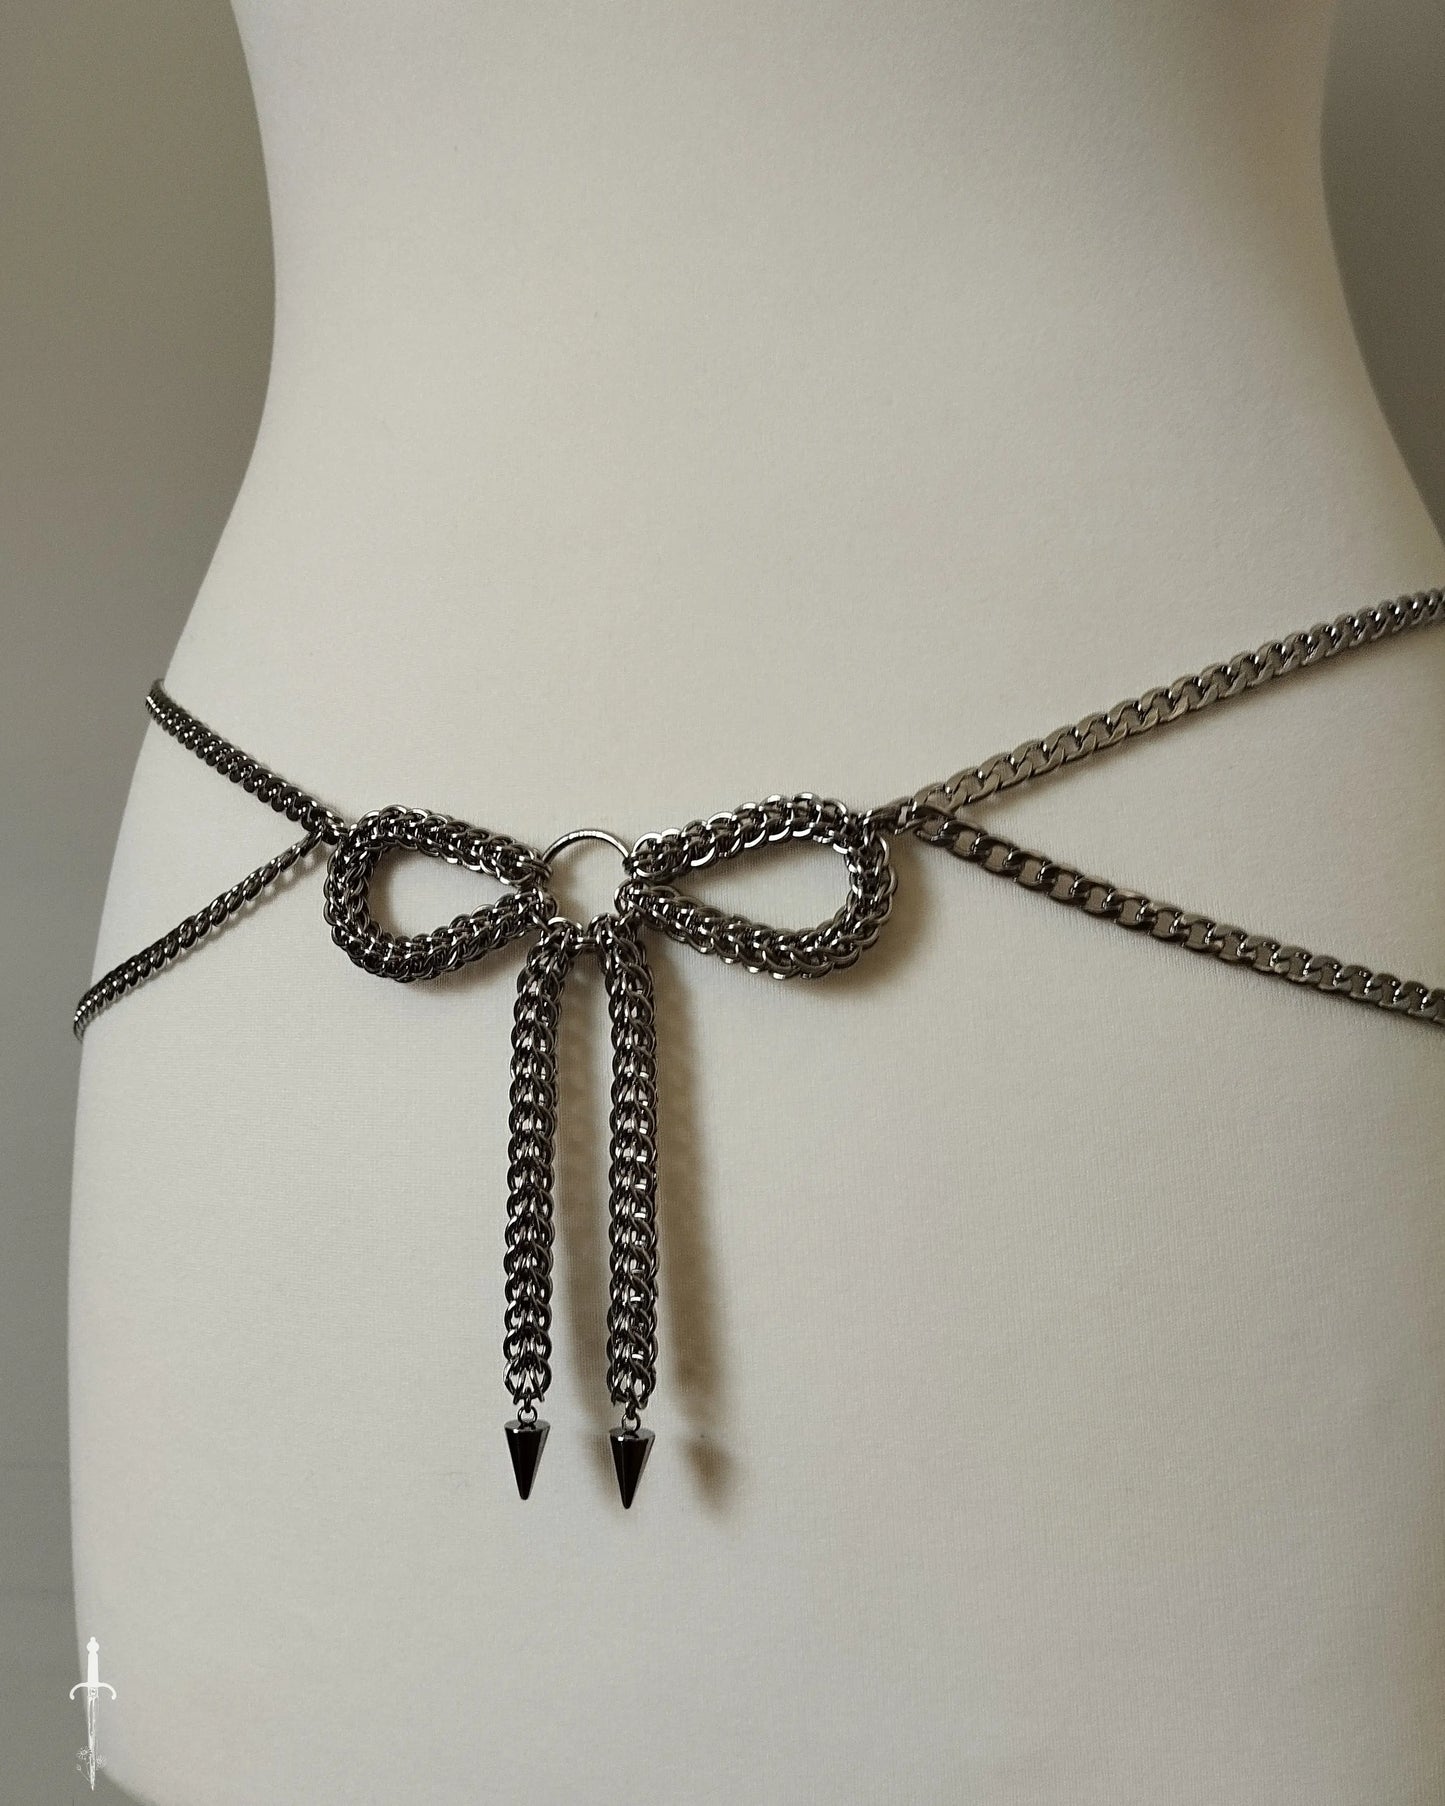 The Bow Chainmail Belt Chain in Stainless Steel